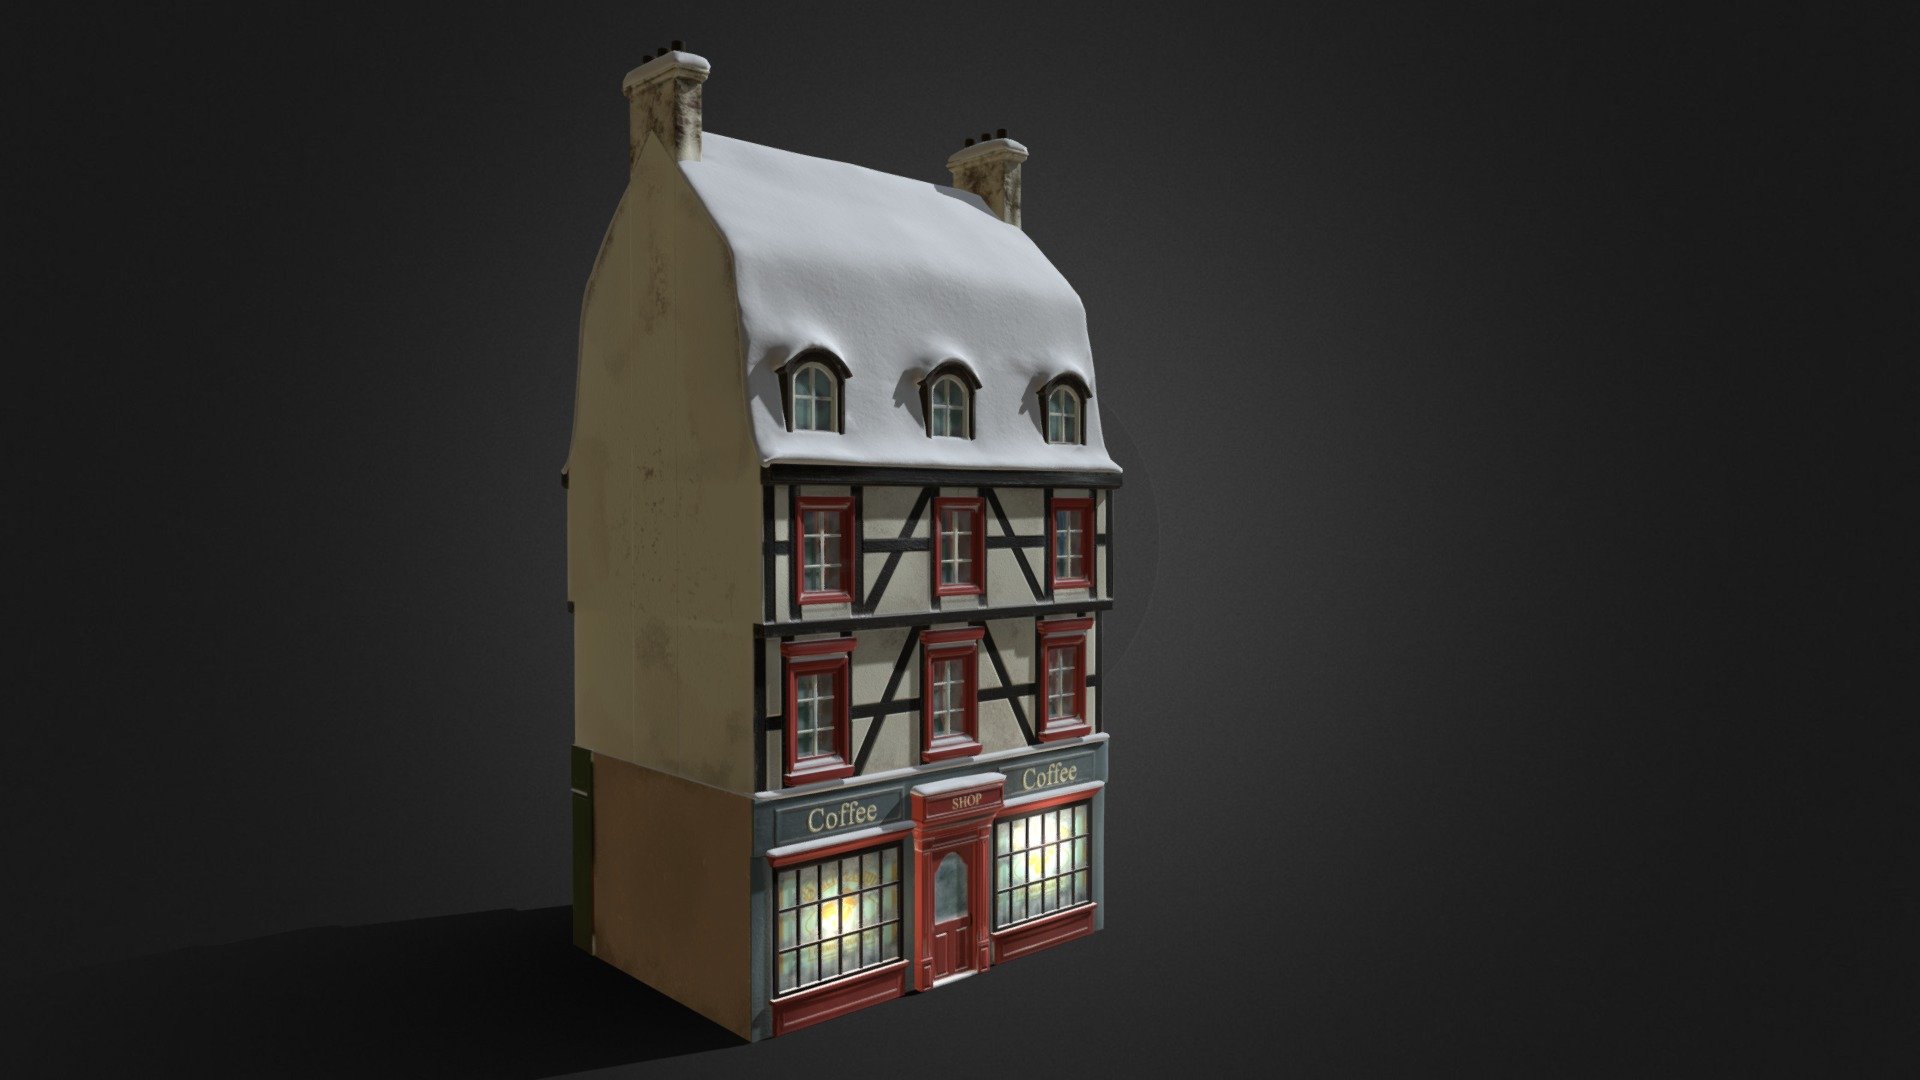 House-1.2 is lowpoly model. It is one of models of “Town Square Christmas” models set. It will suit for winter scene. Model has Diffuse, Gloss, Specular, Normal and Emission maps made in JPG format. Demo Video: https://www.youtube.com/watch?v=pUWNnTRnEK8 - House-1.2 - Buy Royalty Free 3D model by Vaarg 3d model